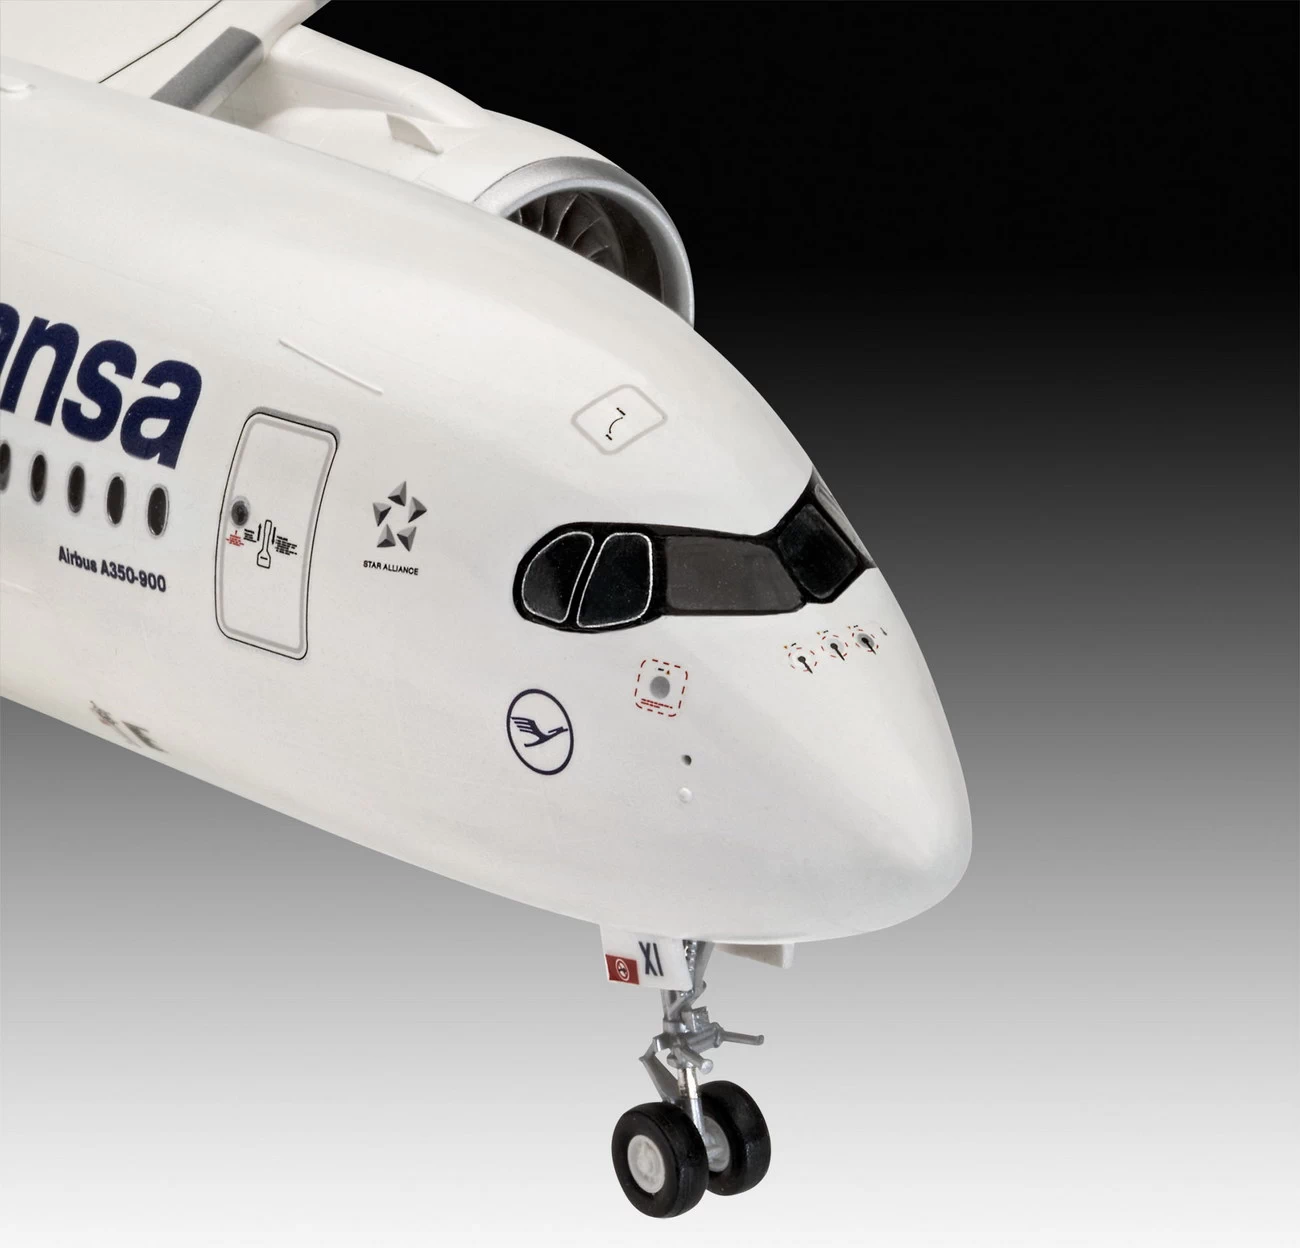 Revell 03881 - Airbus A350-900 Lufthansa New Livery - Flugzeug Modell